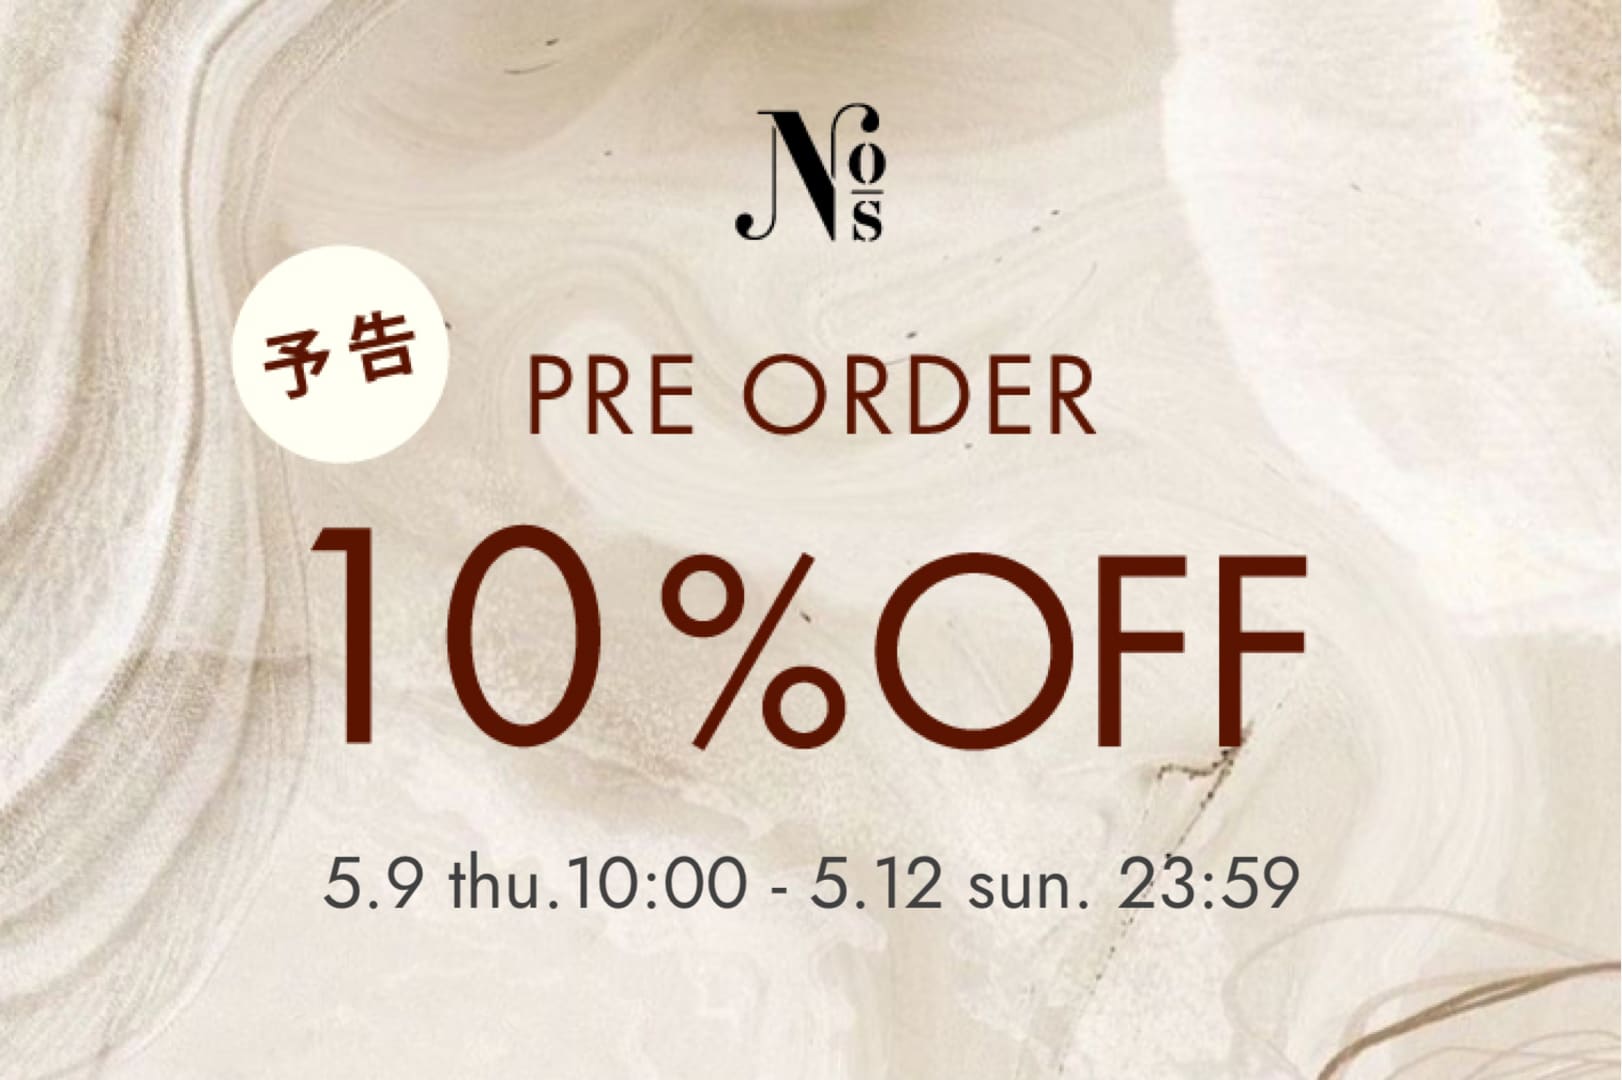 Drawing Numbers ＼予告／【4日間限定】先行予約アイテム10％OFFクーポン配信！